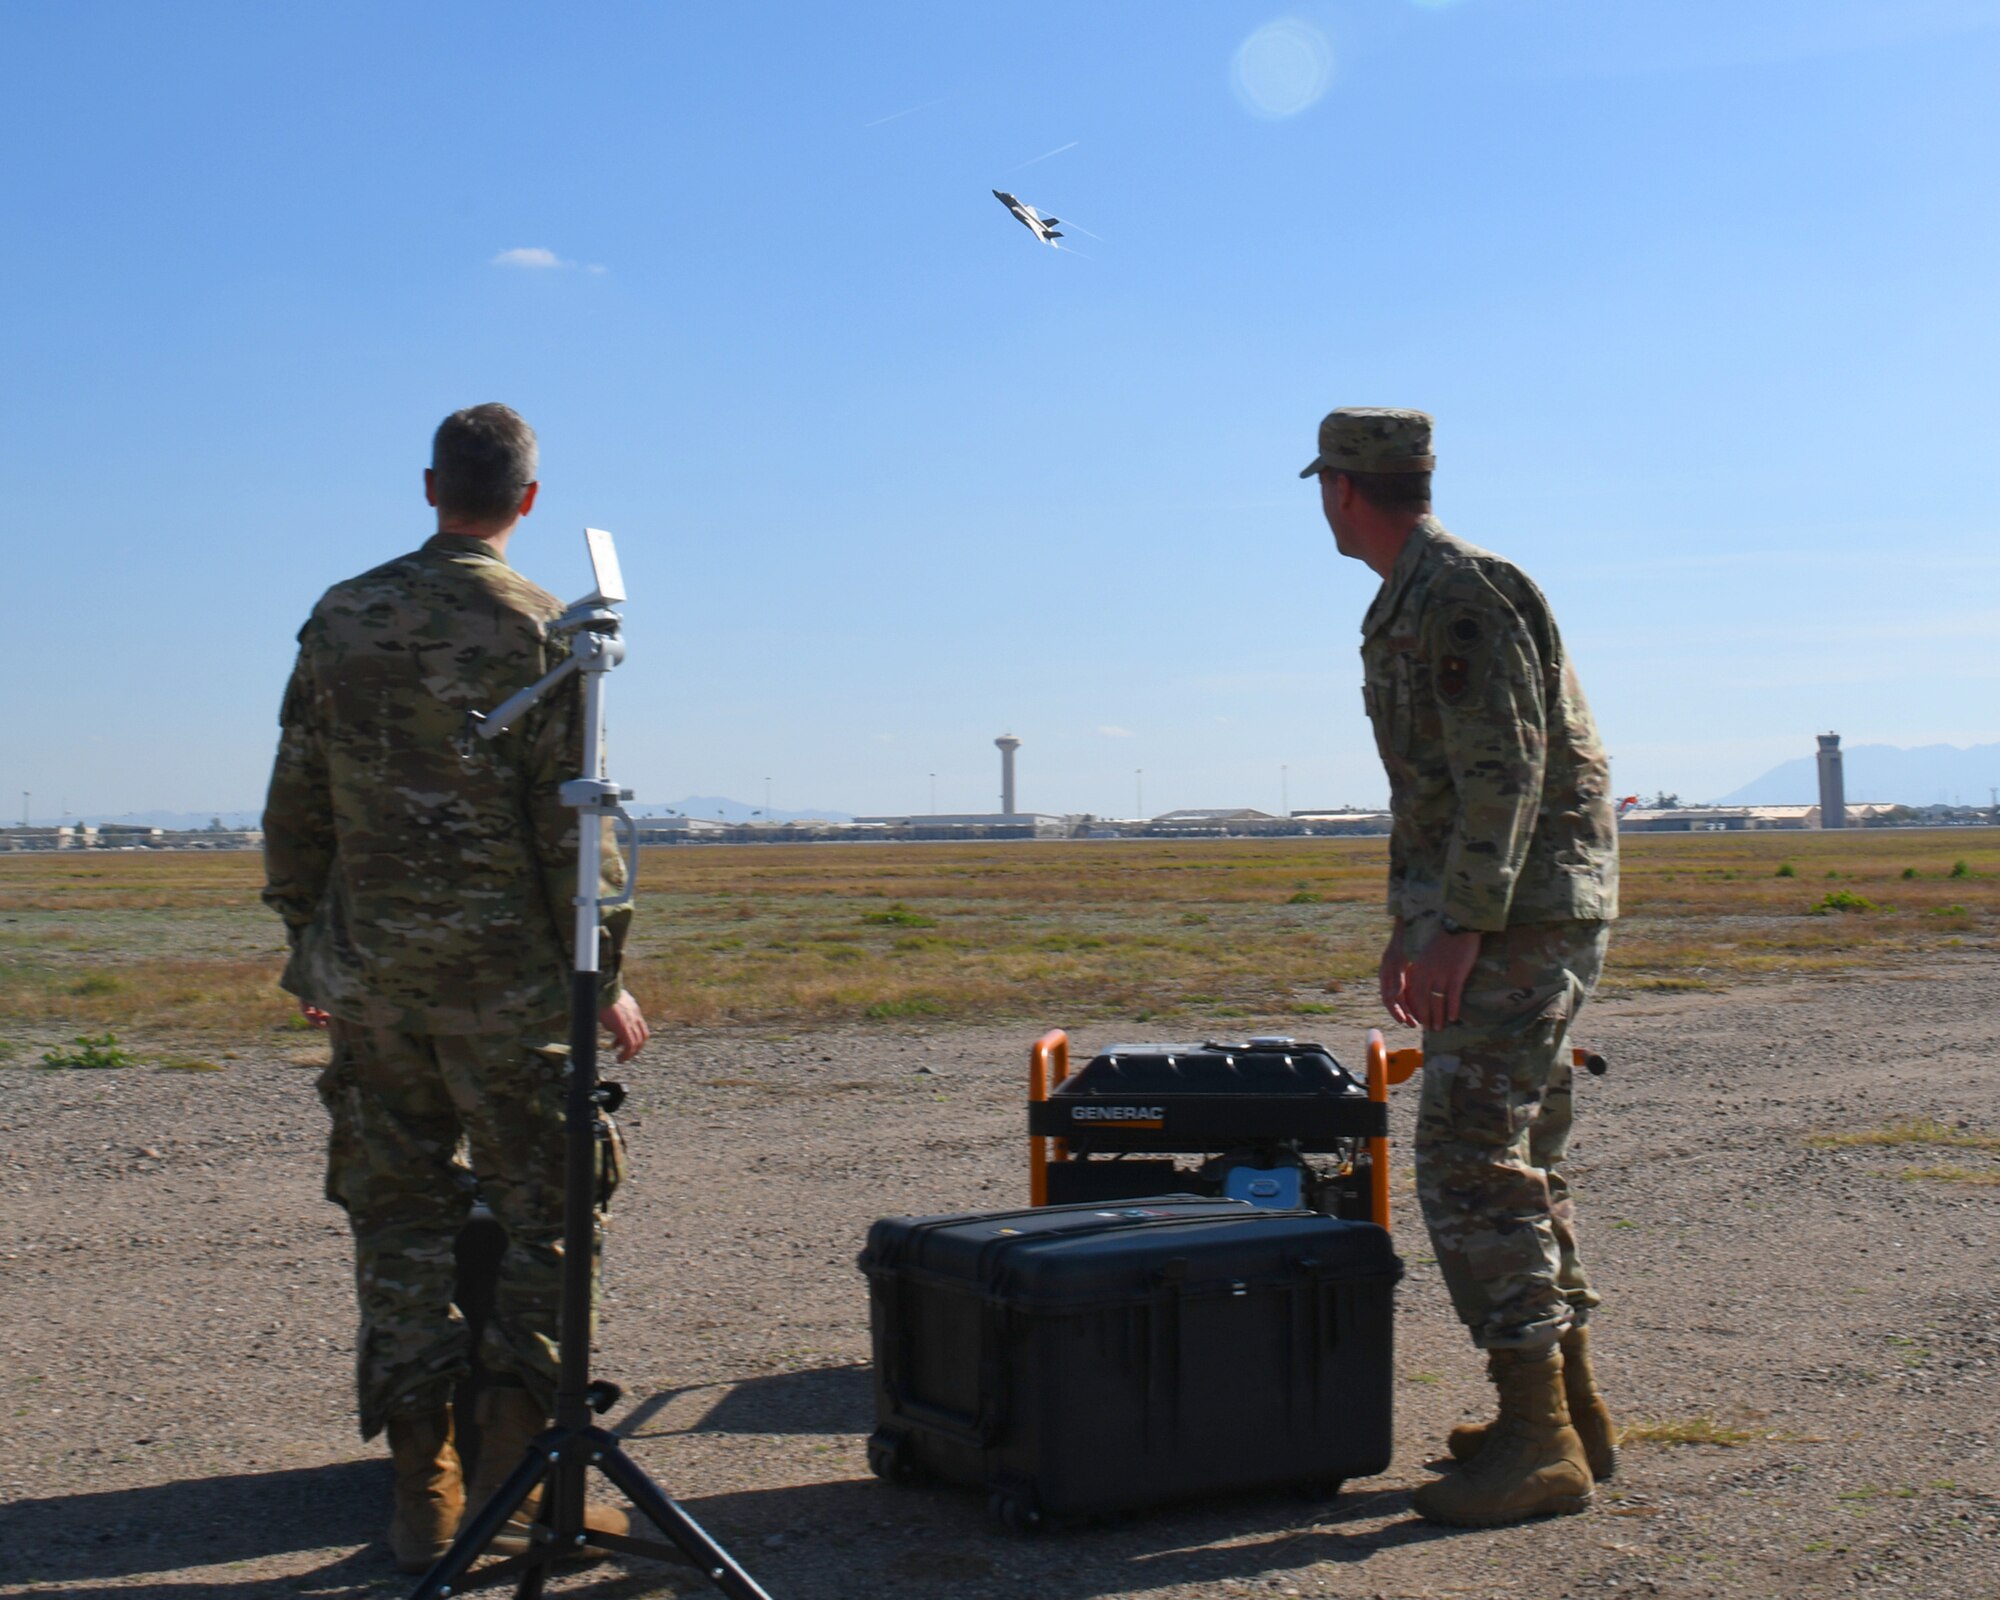 First Lt. Adam Treece, 56th Operations Support Squadron intelligence readiness chief, and Capt. David Coyle, 56th OSS weapons officer, test a prototype threat emitter system Jan. 17, 2020, at Luke Air Force Base, Ariz. Treece, Coyle and Wylie Standage Beier, Arizona State University electrical engineering PhD student, made the project ‘Making Waves’, to create a low-cost, mobile threat emitter system to be used in training for fifth-generation aircraft. The team is one of six finalists in the annual Spark Tank competition. (U.S. Air Force photo by Airman 1st Class Leala Marquez)